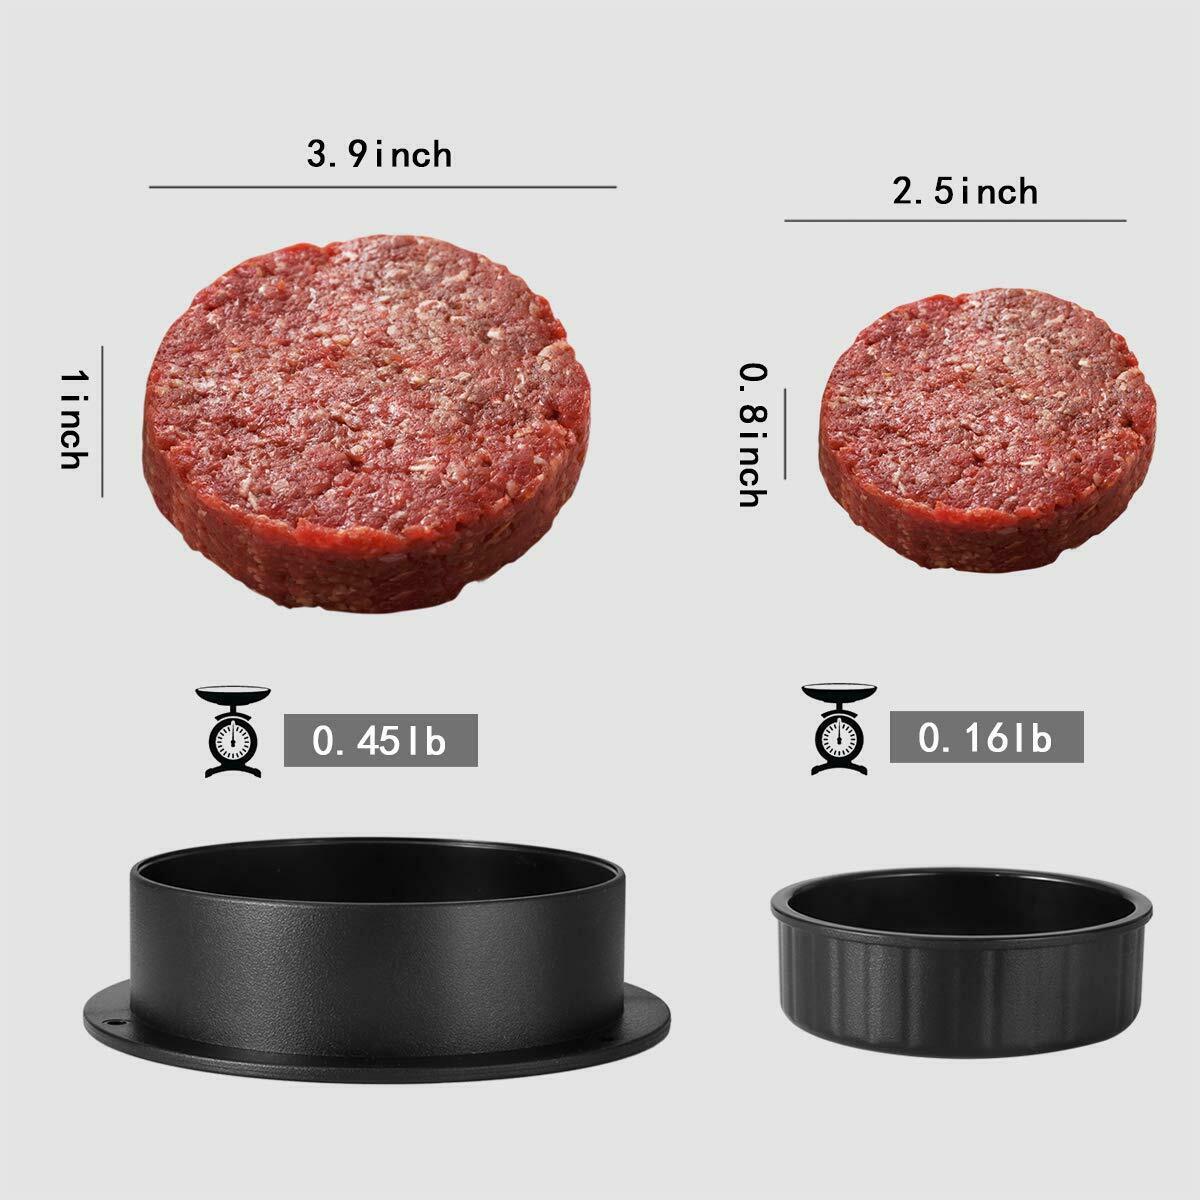 a hamburger pattie with measuring sizes with text: '3.9inch 2. 5inch 0. 8inch 1inch 0. b 0.'